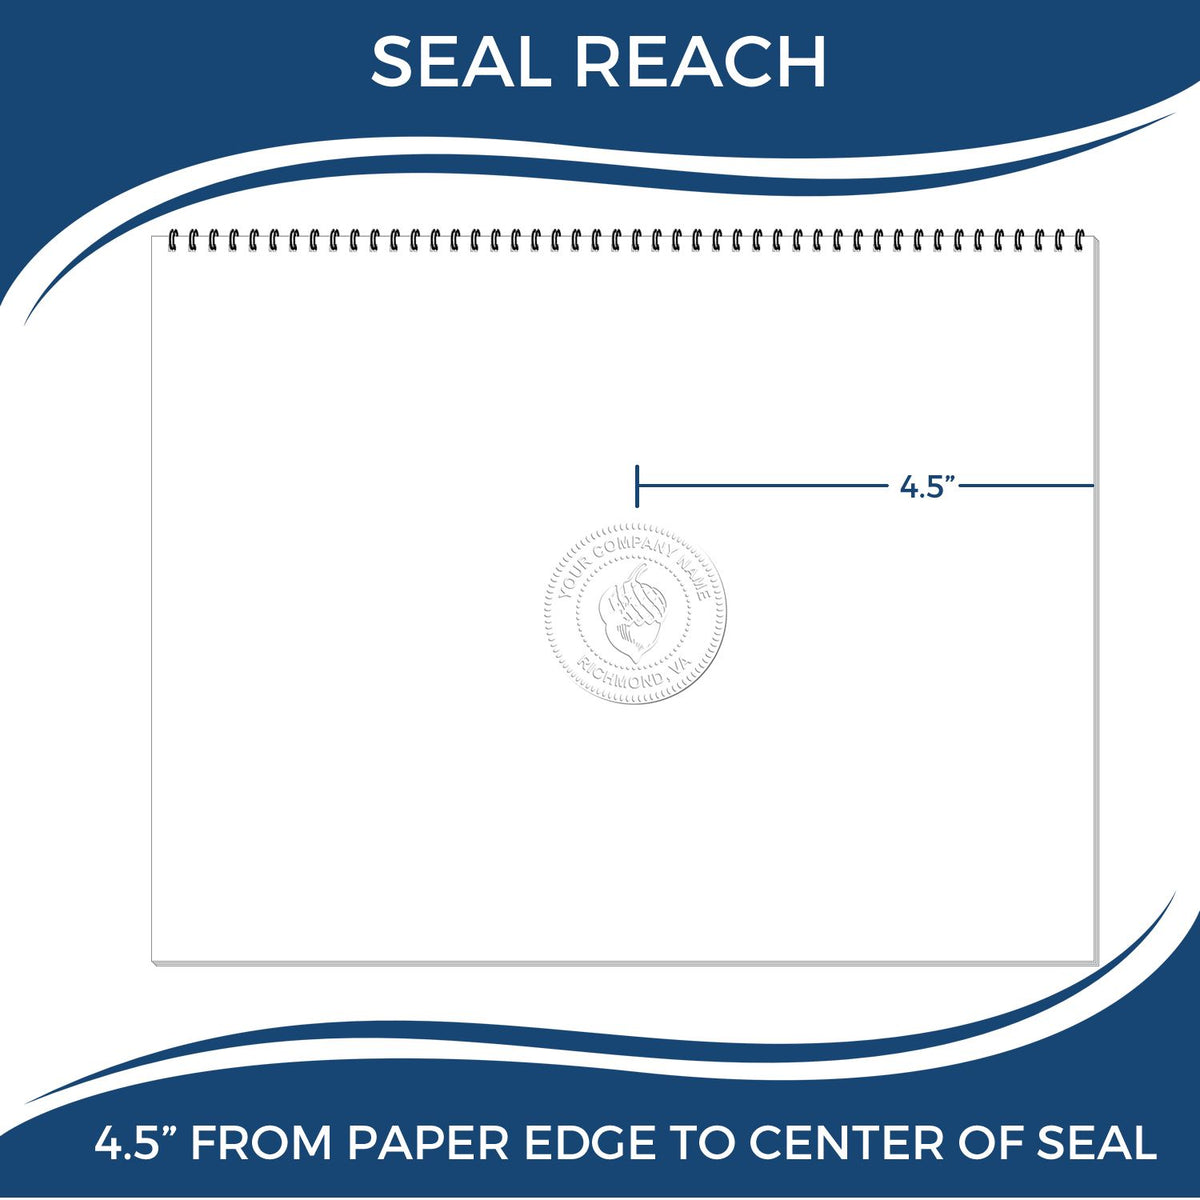 An infographic showing the seal reach which is represented by a ruler and a miniature seal image of the Extended Long Reach Guam Architect Seal Embosser